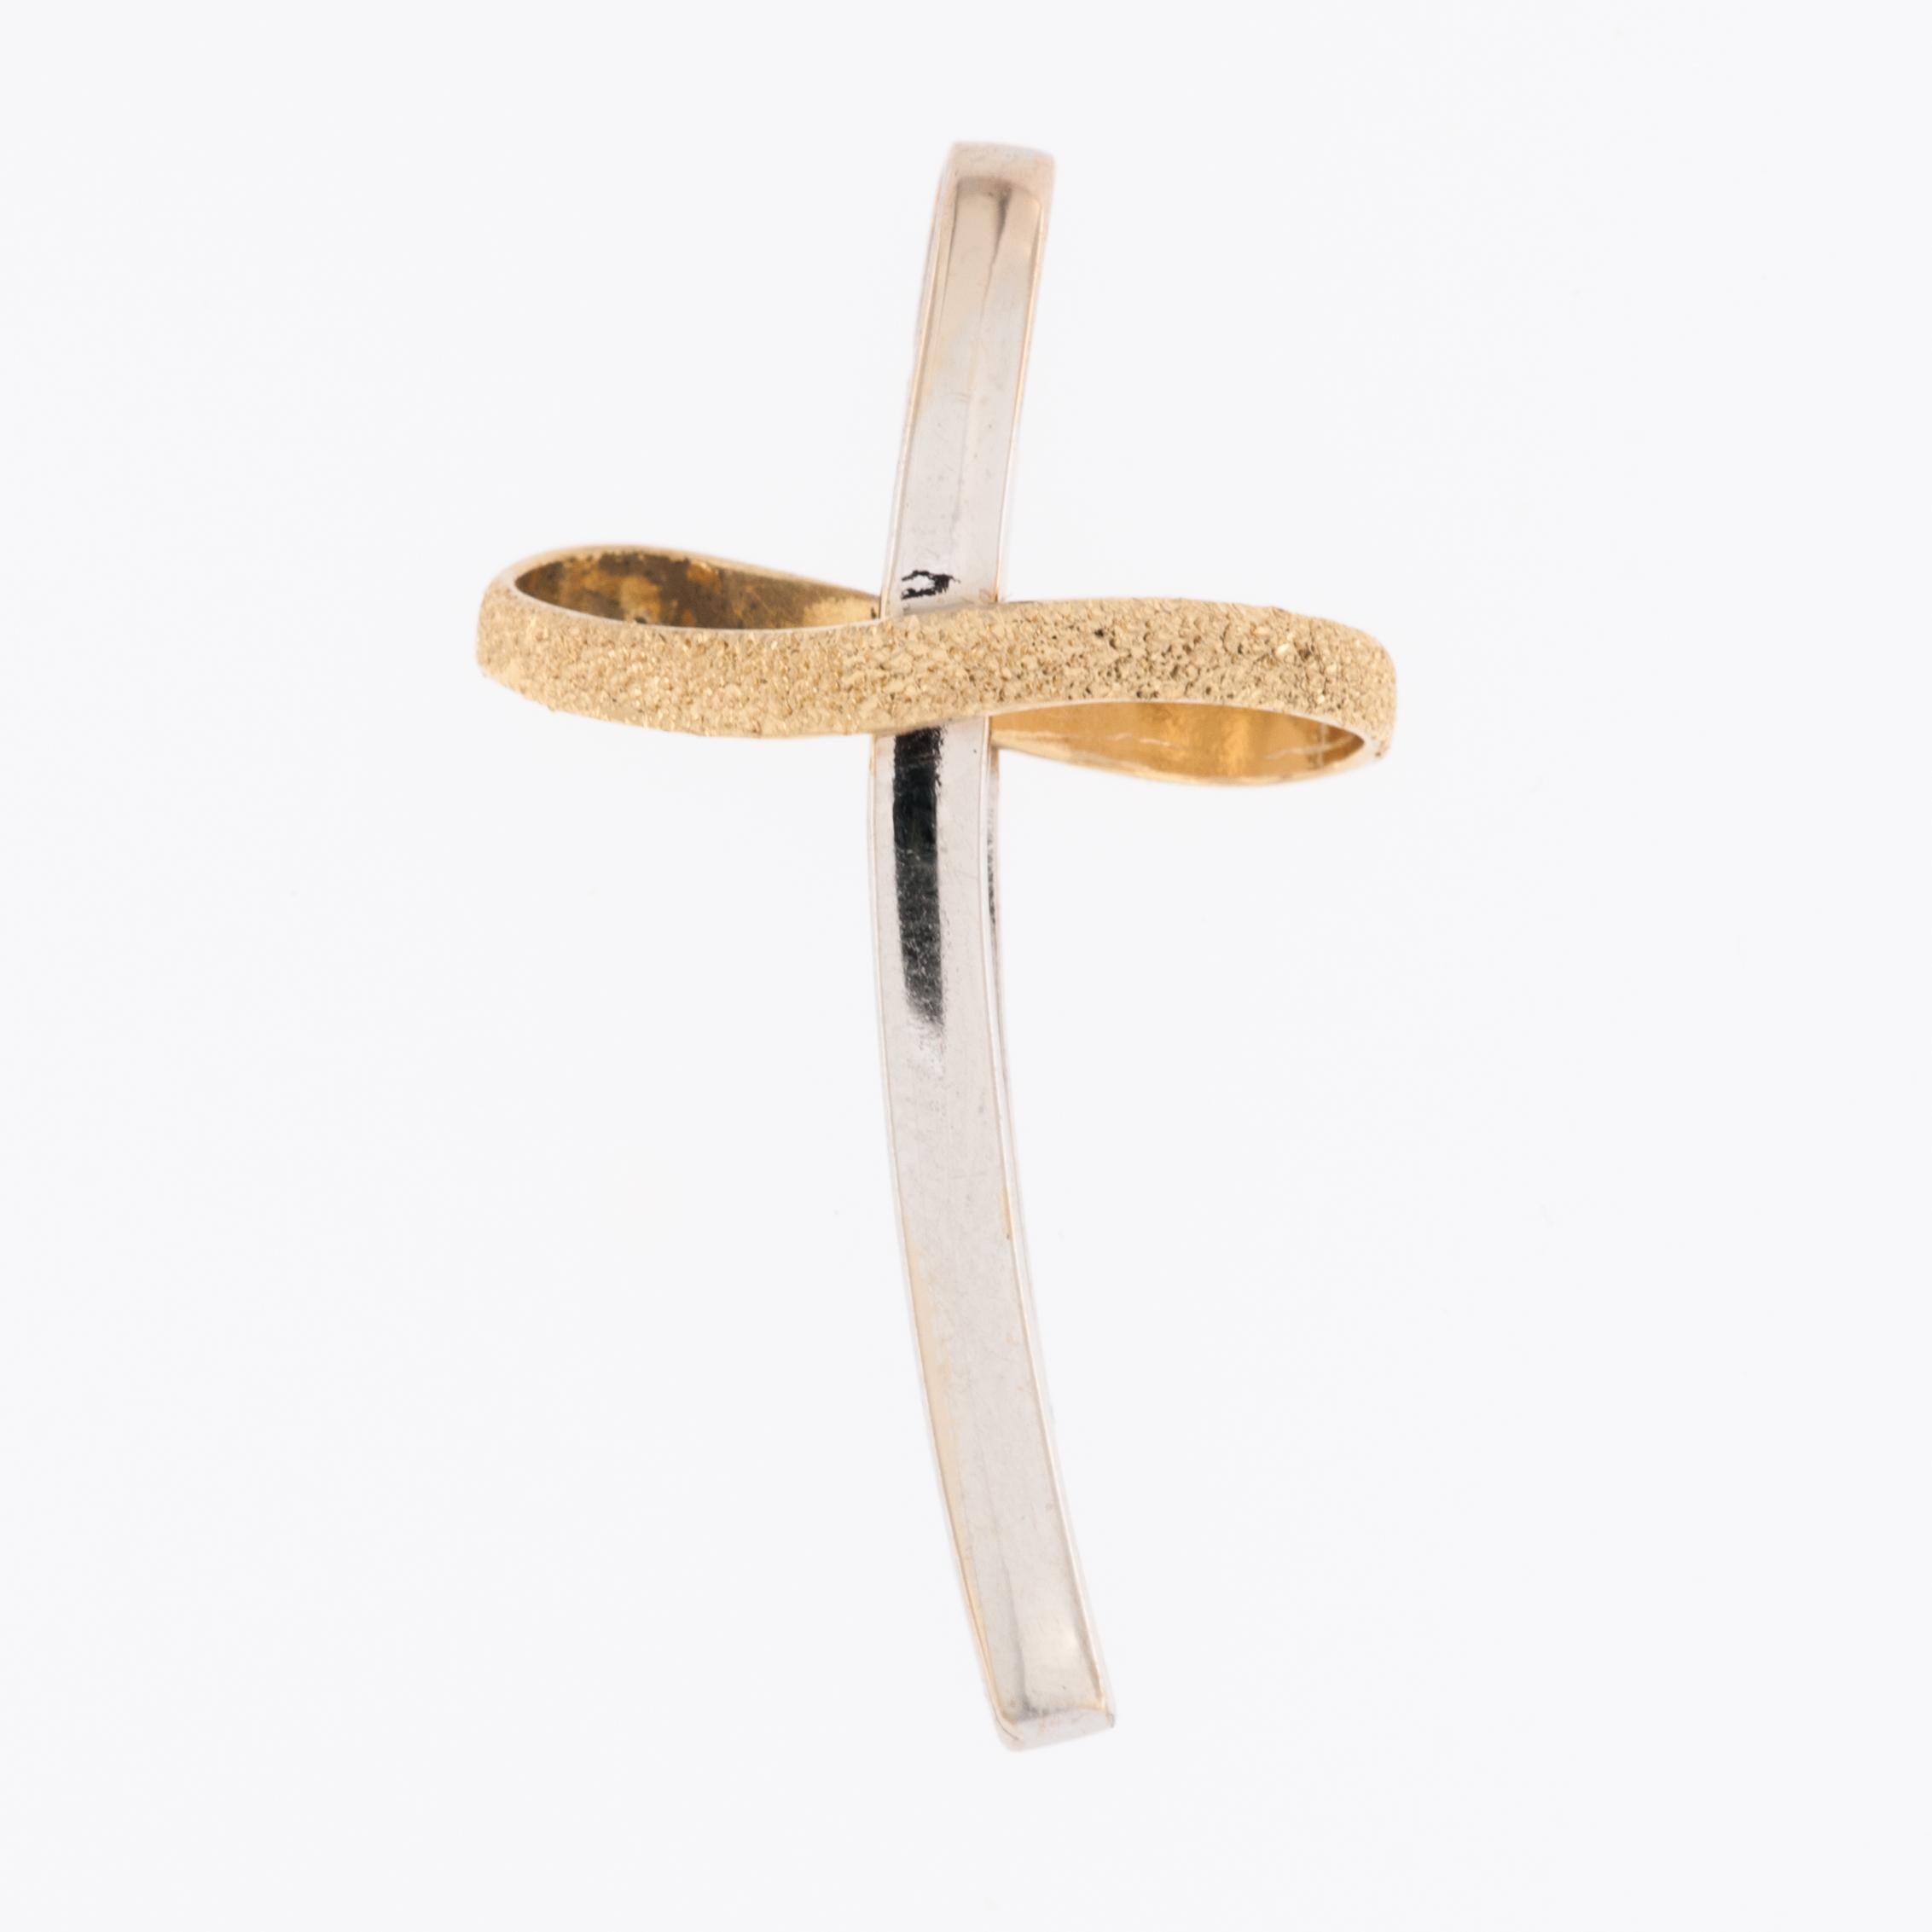 The Italian 18kt Yellow and White Gold Cross is a piece of jewelry that combines the beauty of two different gold colors, yellow and white, to create a stunning and meaningful symbol of faith. 

This cross is crafted from 18 karat gold, which